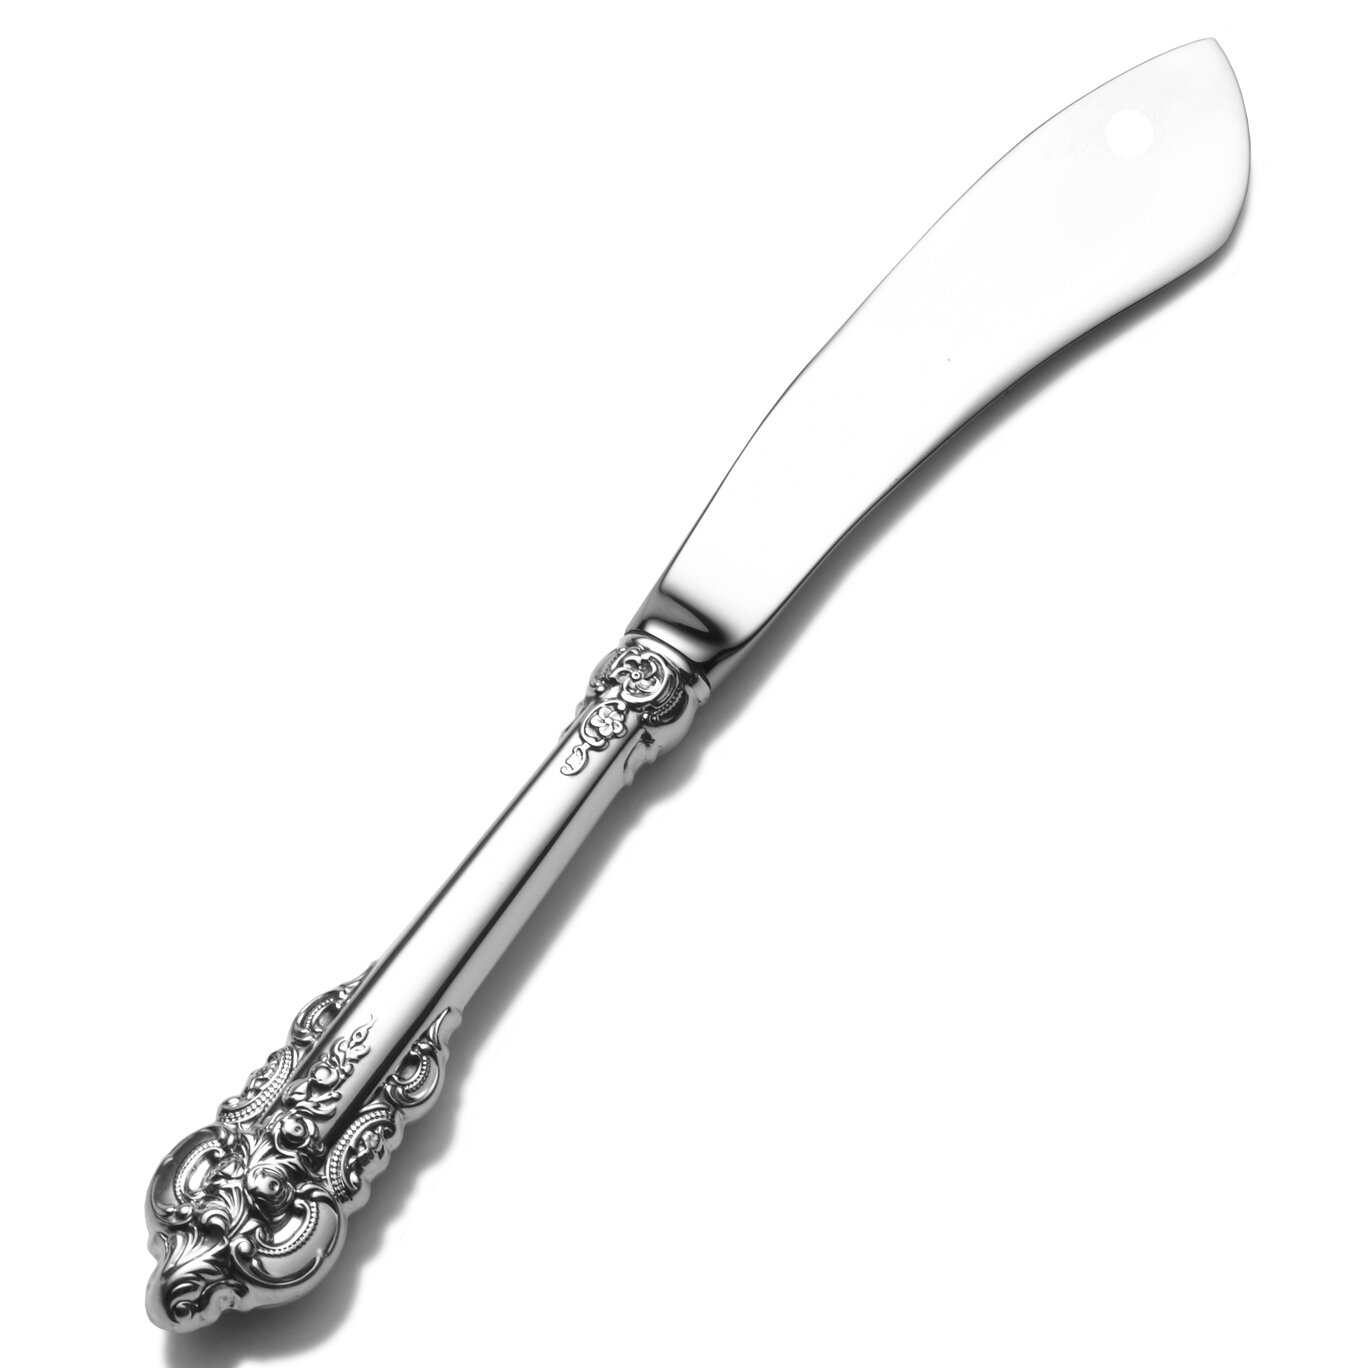 S GRANDE BAROQUE-WALLACE STERLING HH BUTTER SPREADER 